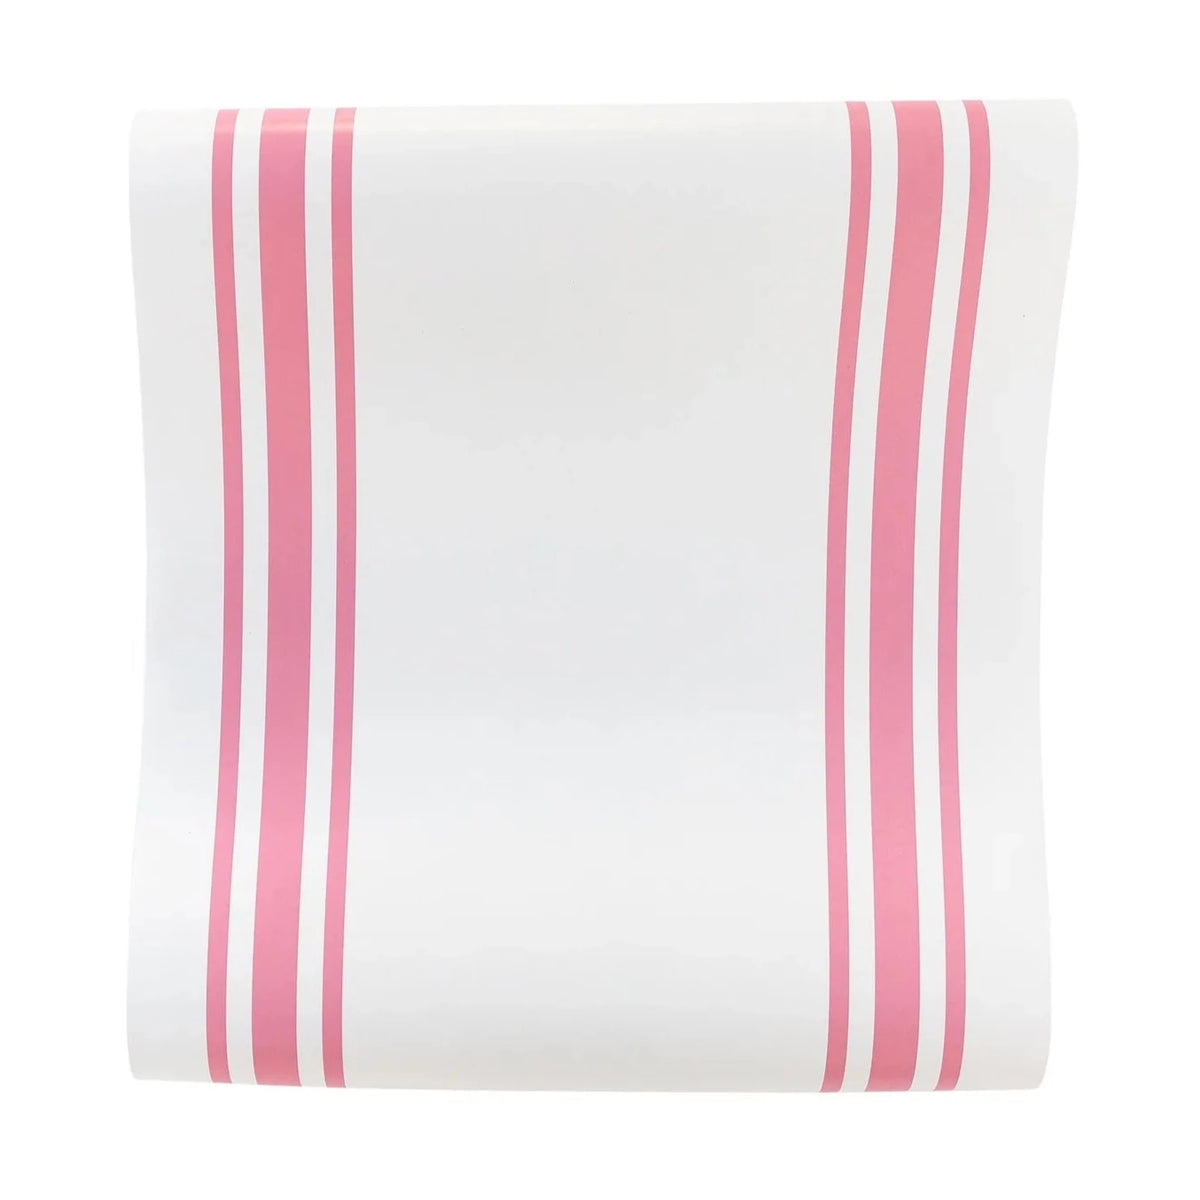 Pearl Affair” Table Runner - The Pink Window